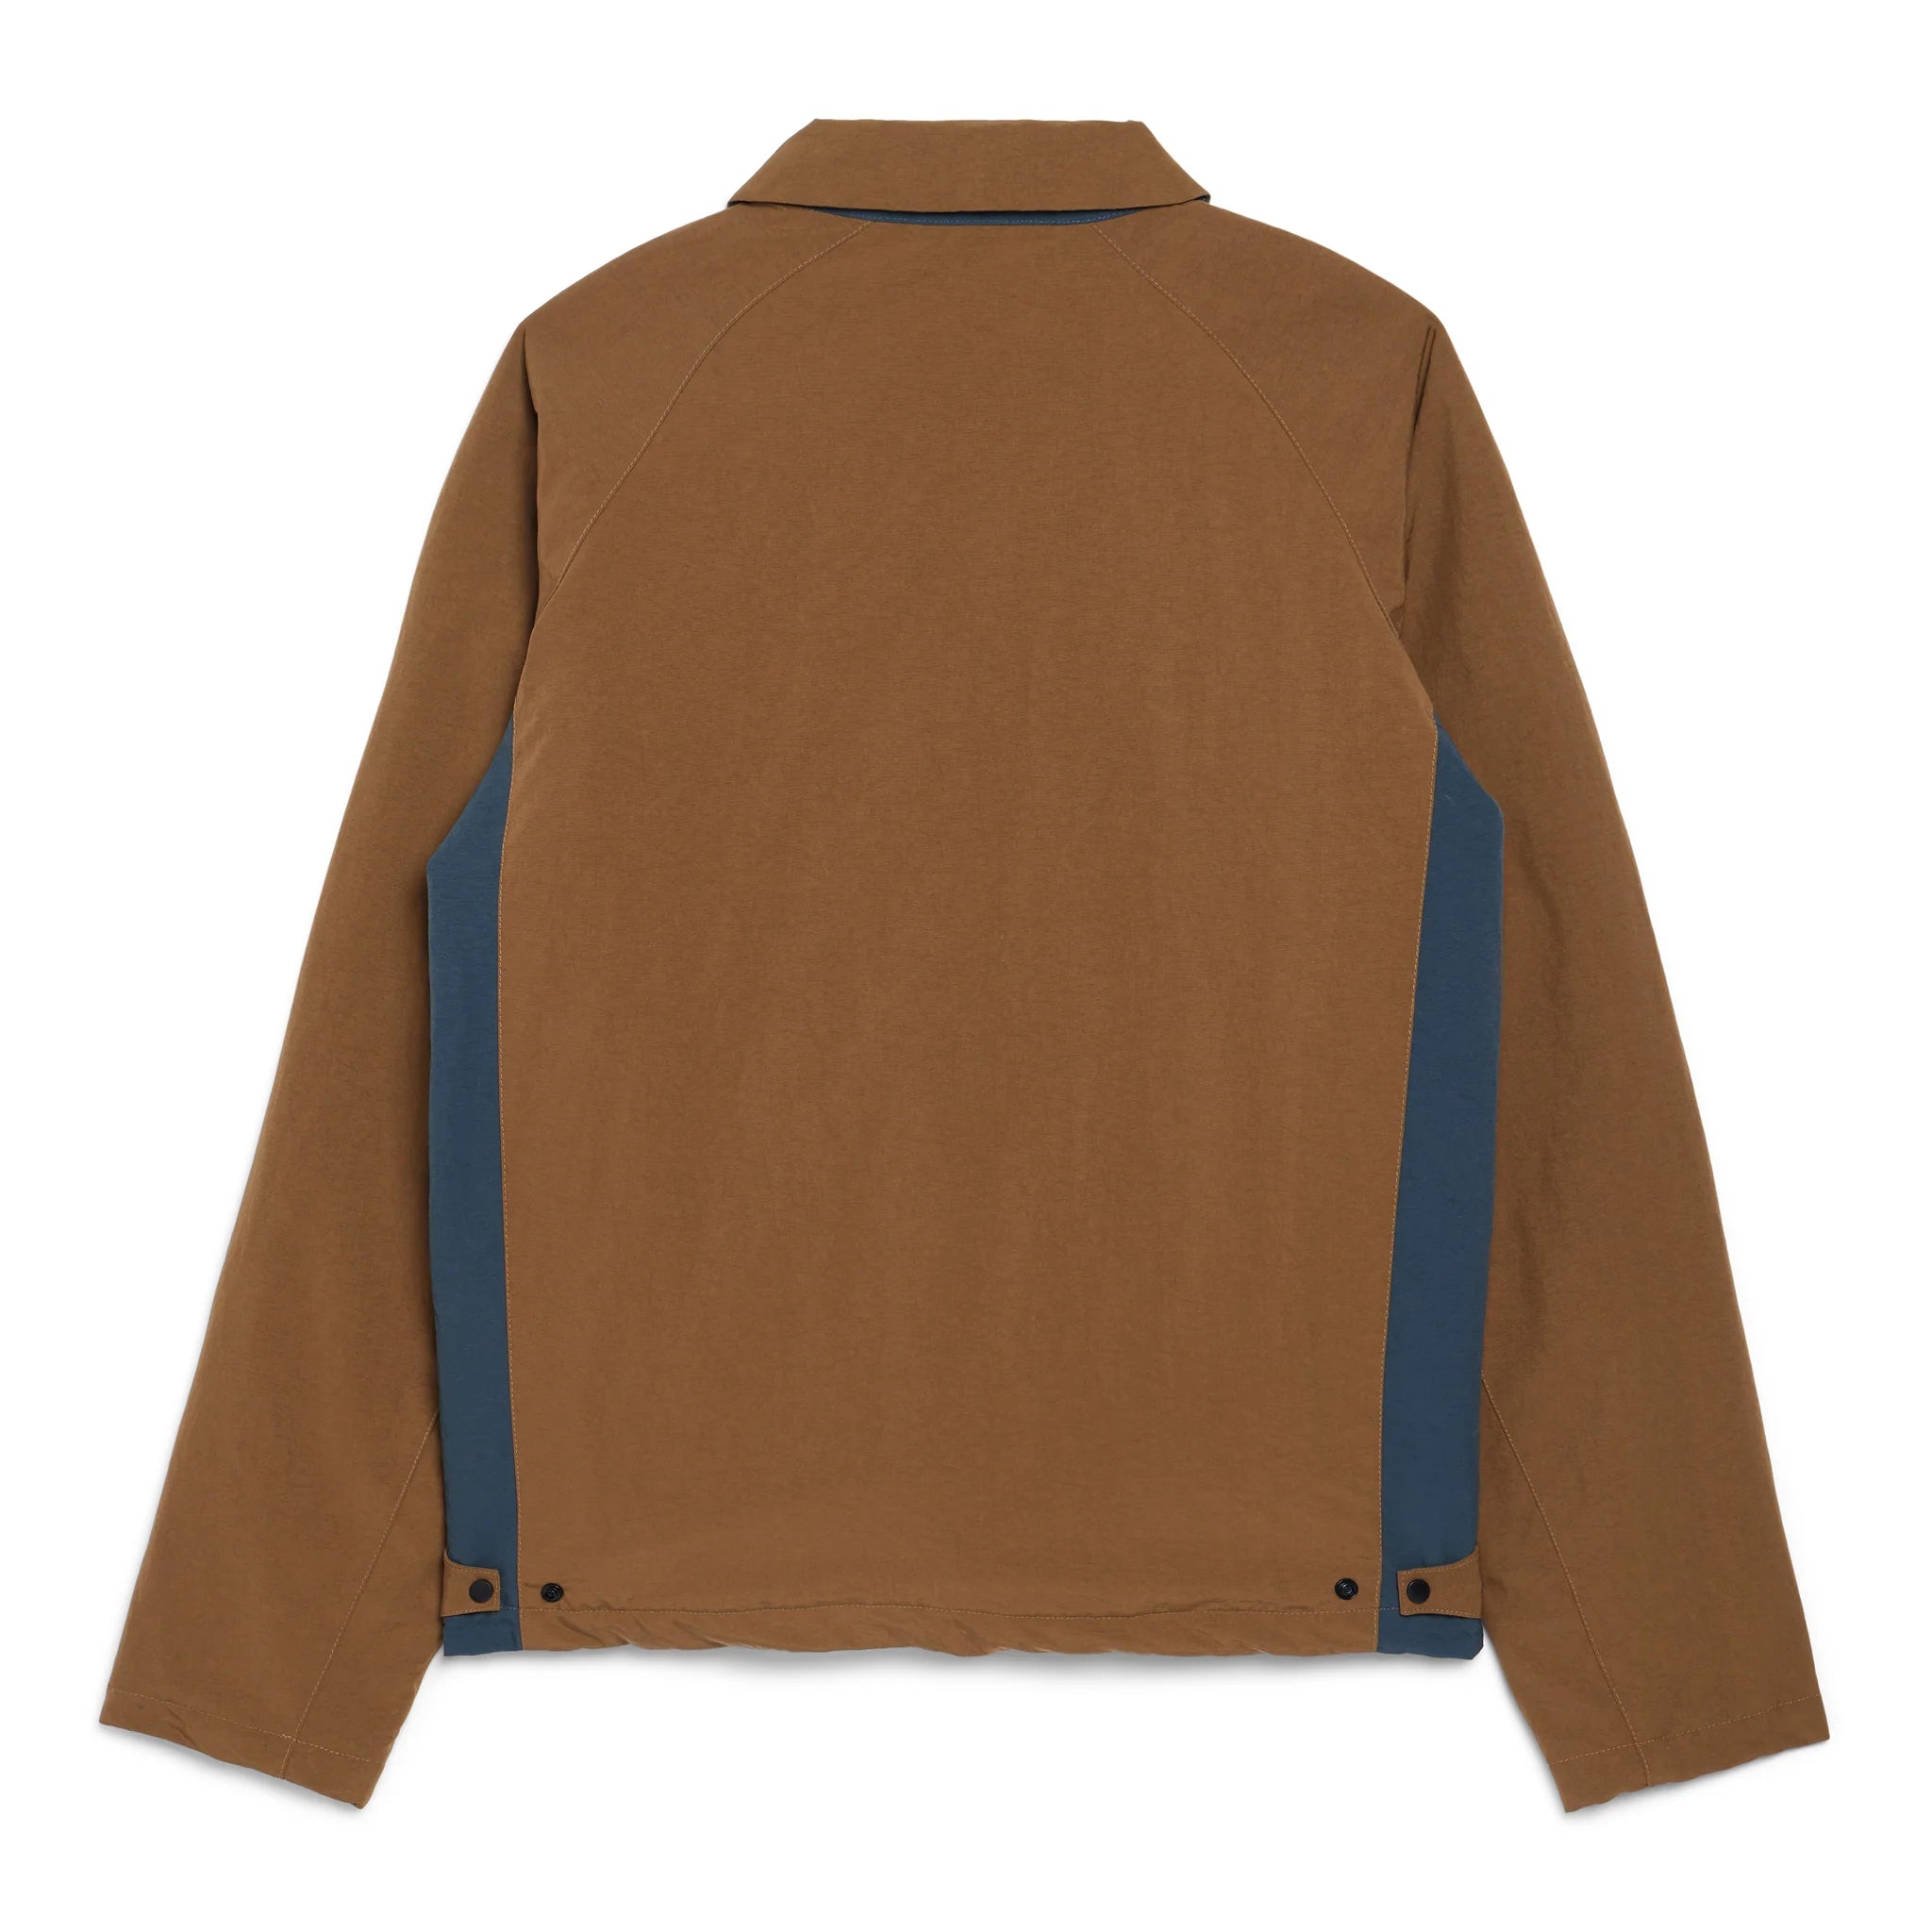 Afield Out Echo Jacket 'Brown Teal'